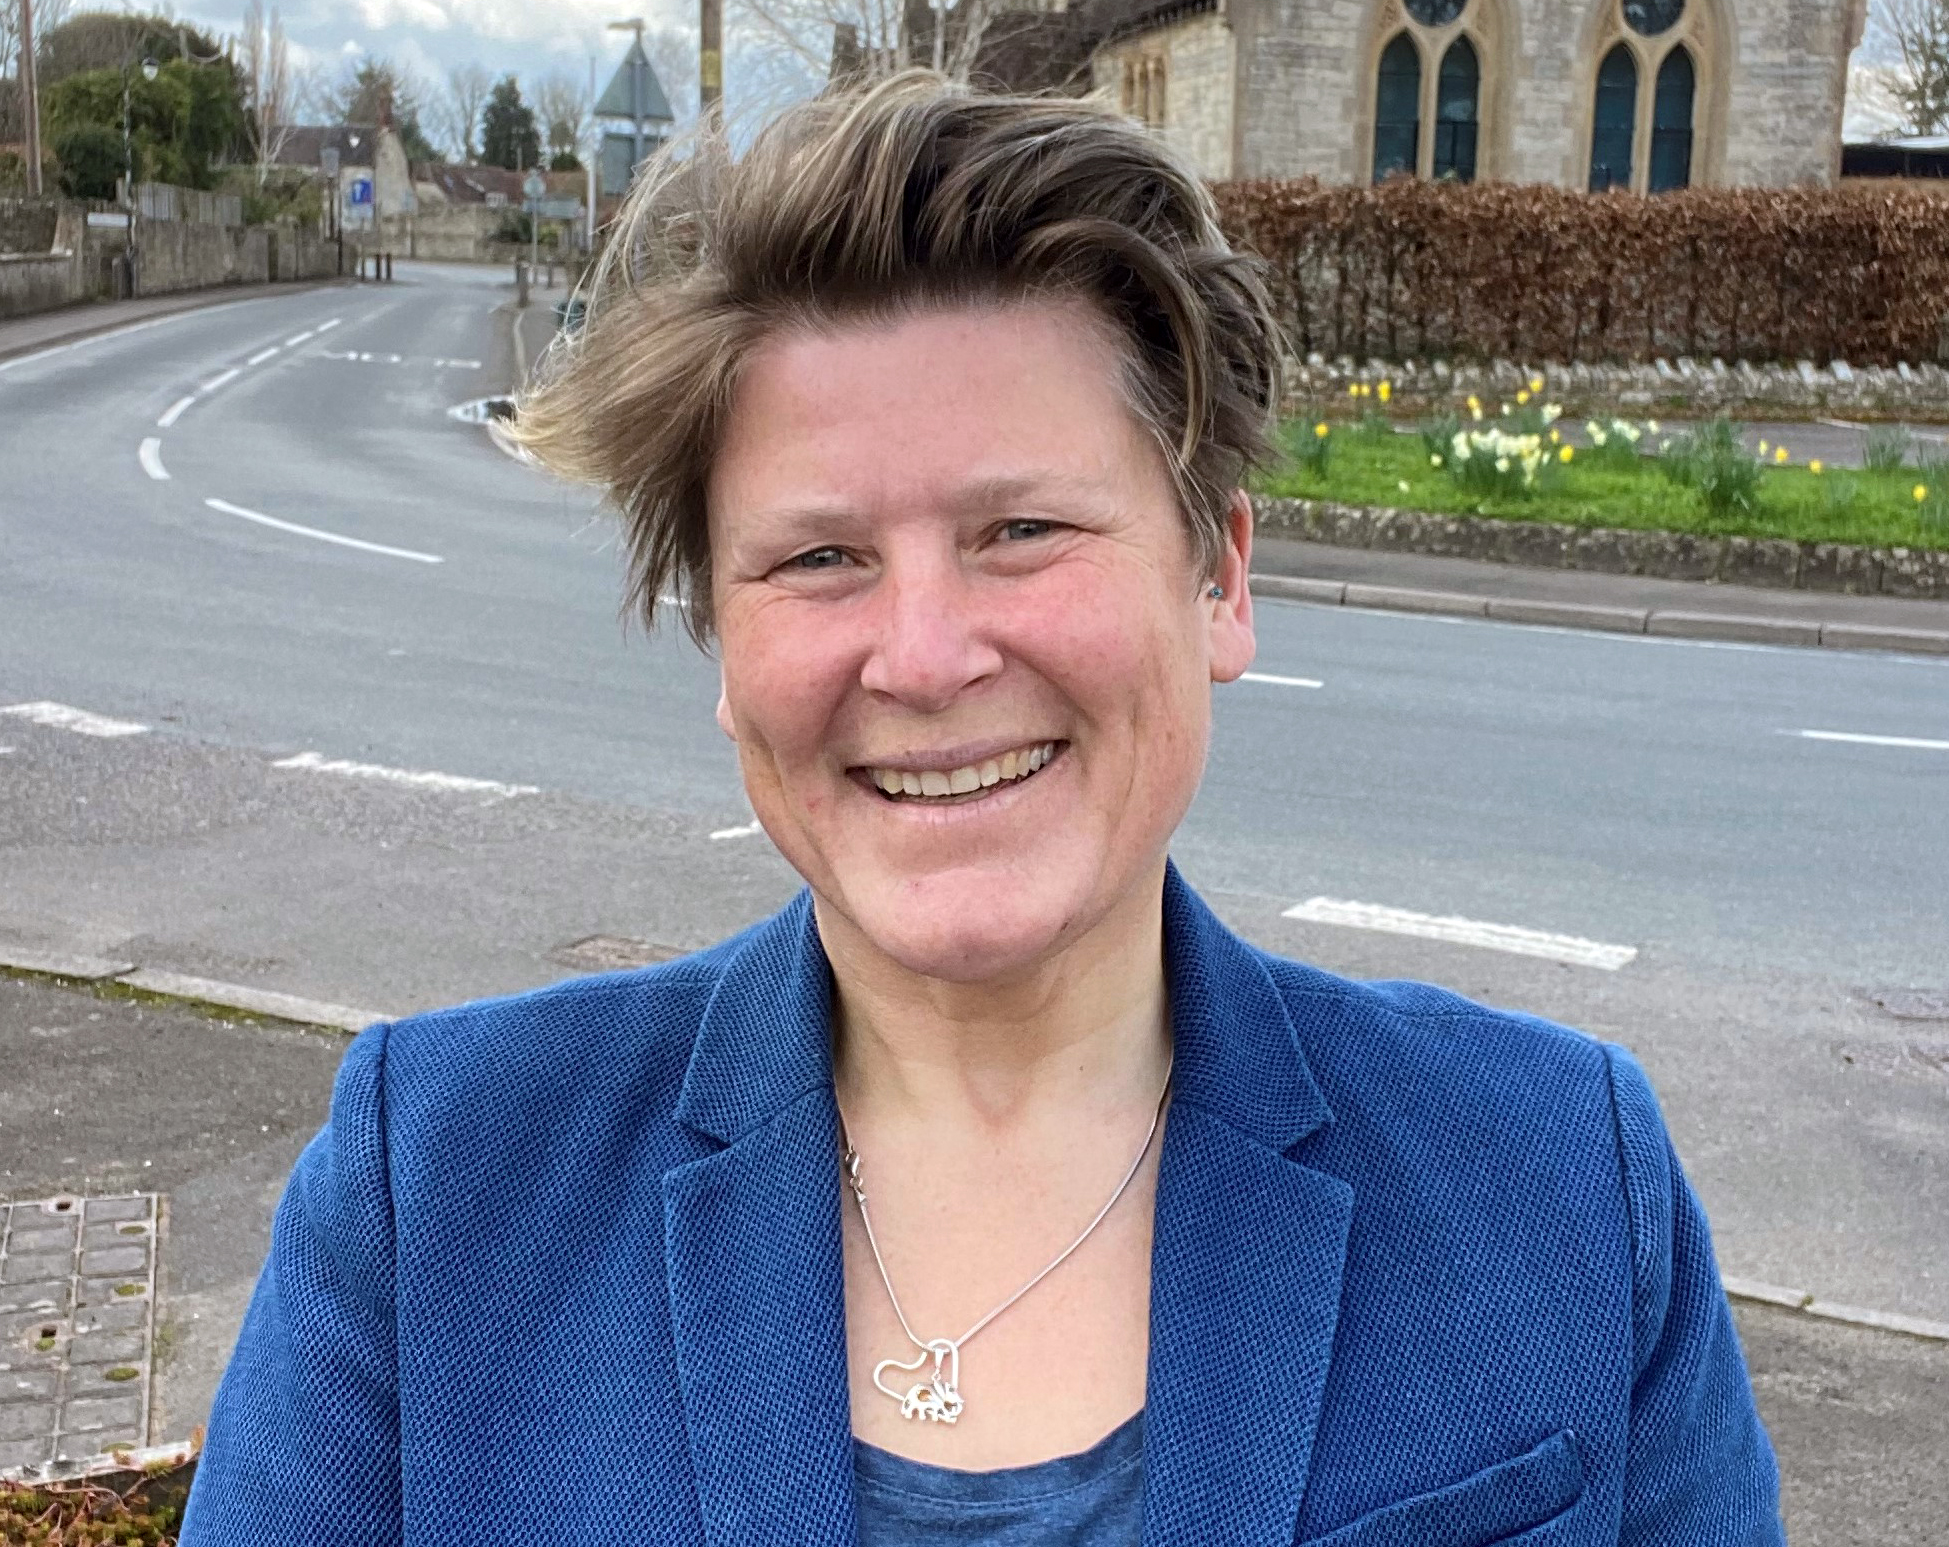 Sarah Dyke, the Lid Dem prospective parliamentary candidate for Somerton and Frome, has called on Mr Warburton to stand down